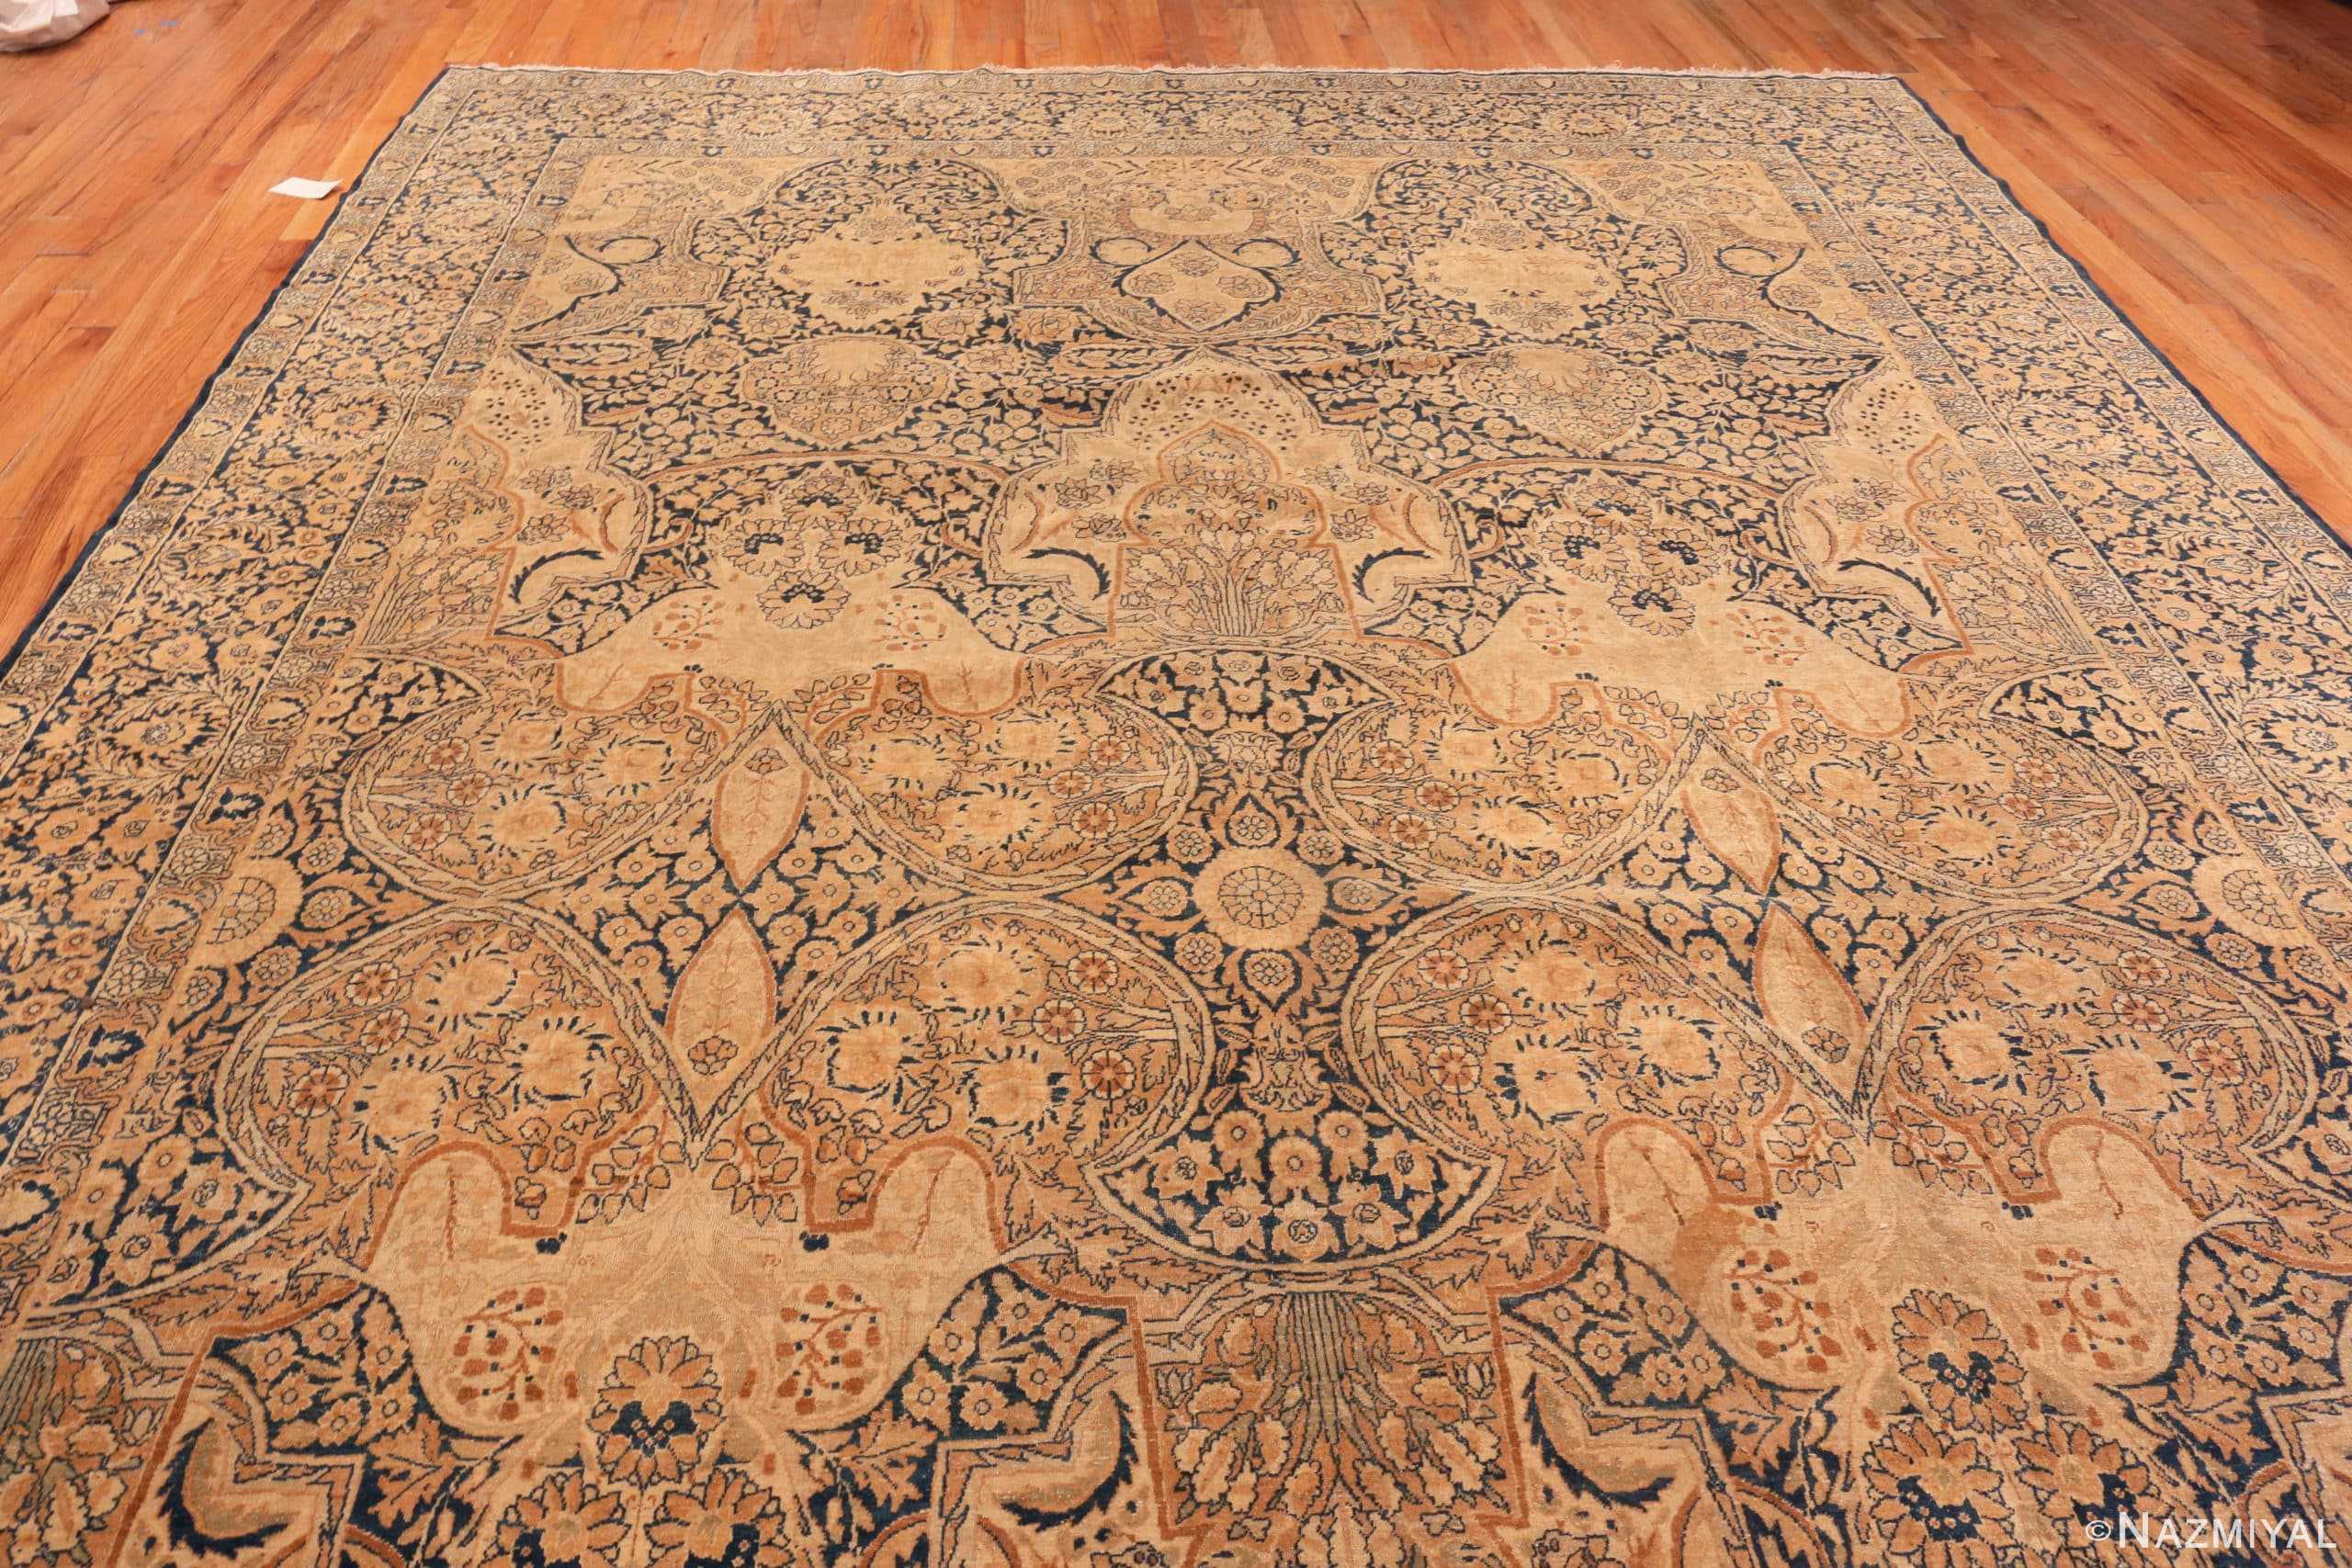 Details View Of View Of Large Decorative Antique Persian Kerman Rug 71332 by Nazmiyal Antique Rugs